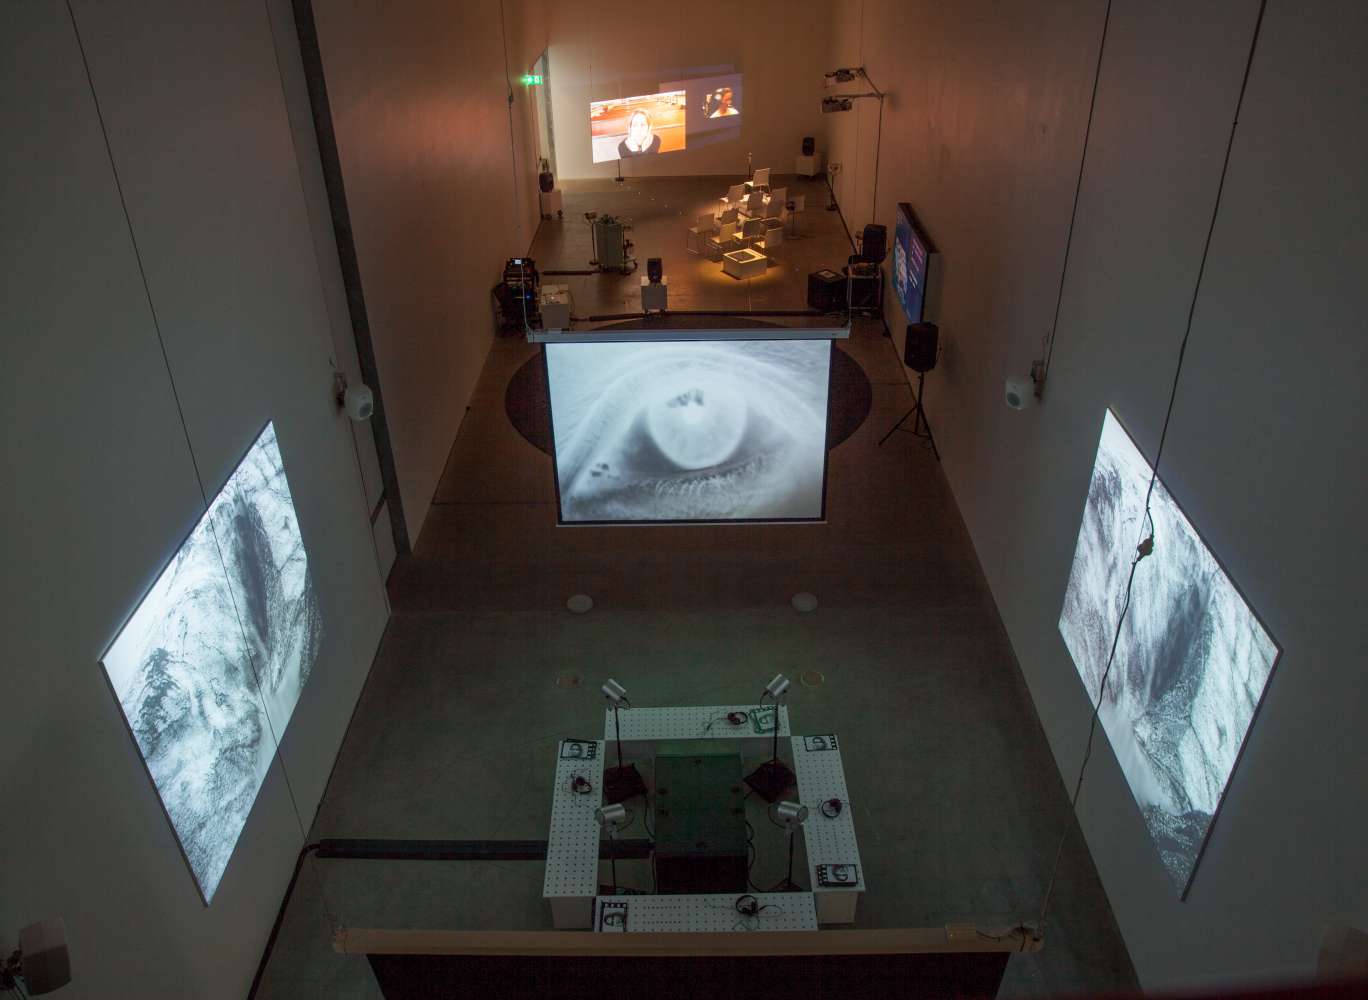 An arial view of an exhibition with screens and headphones.